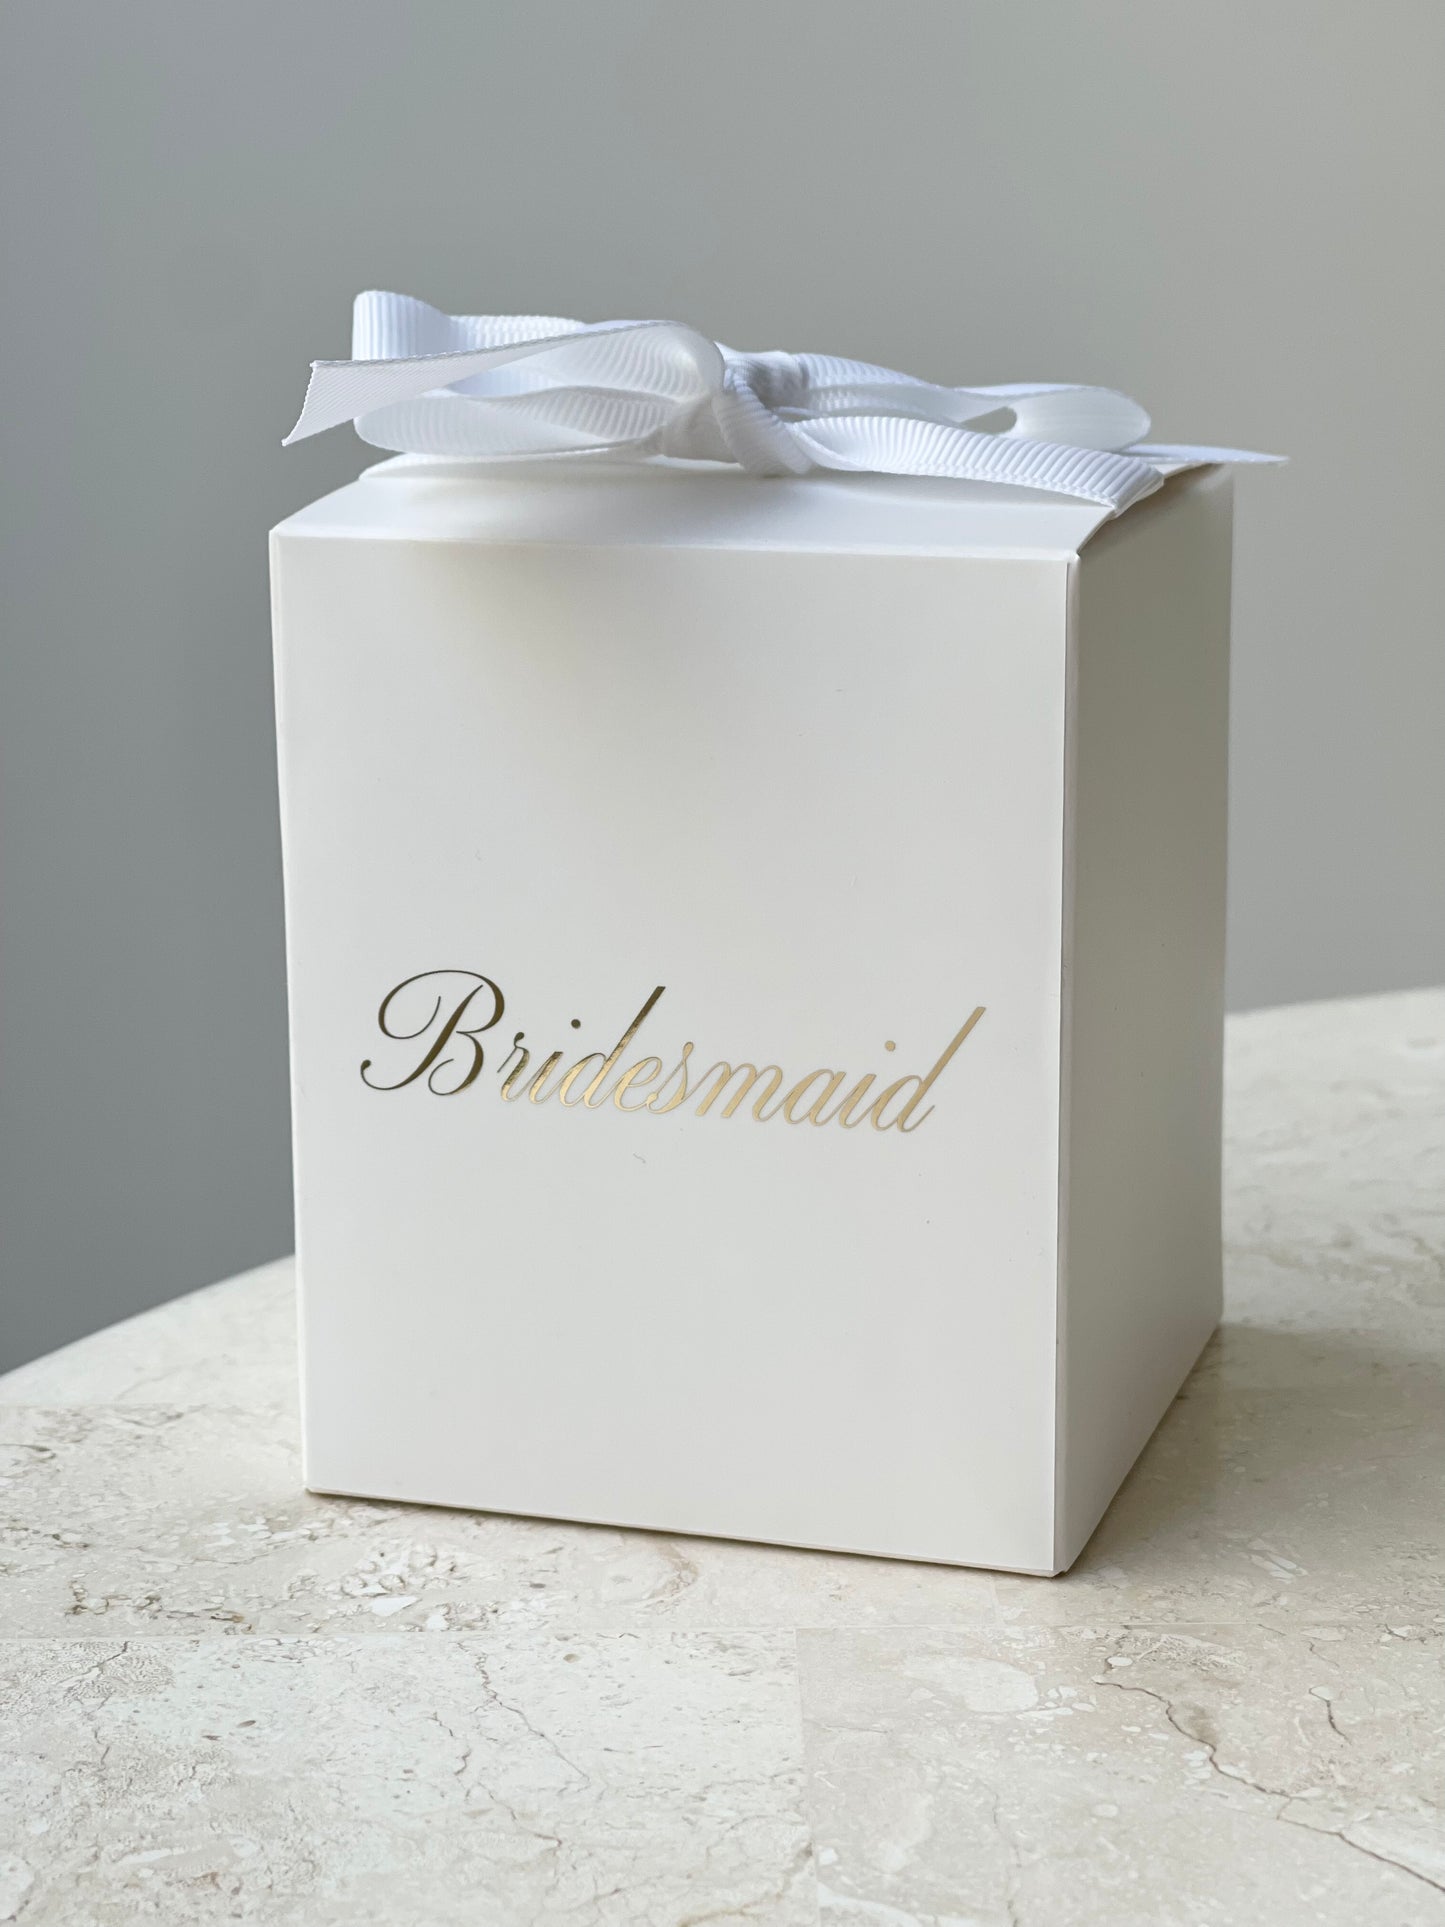 Bridesmaid Gift - Soy blend candle